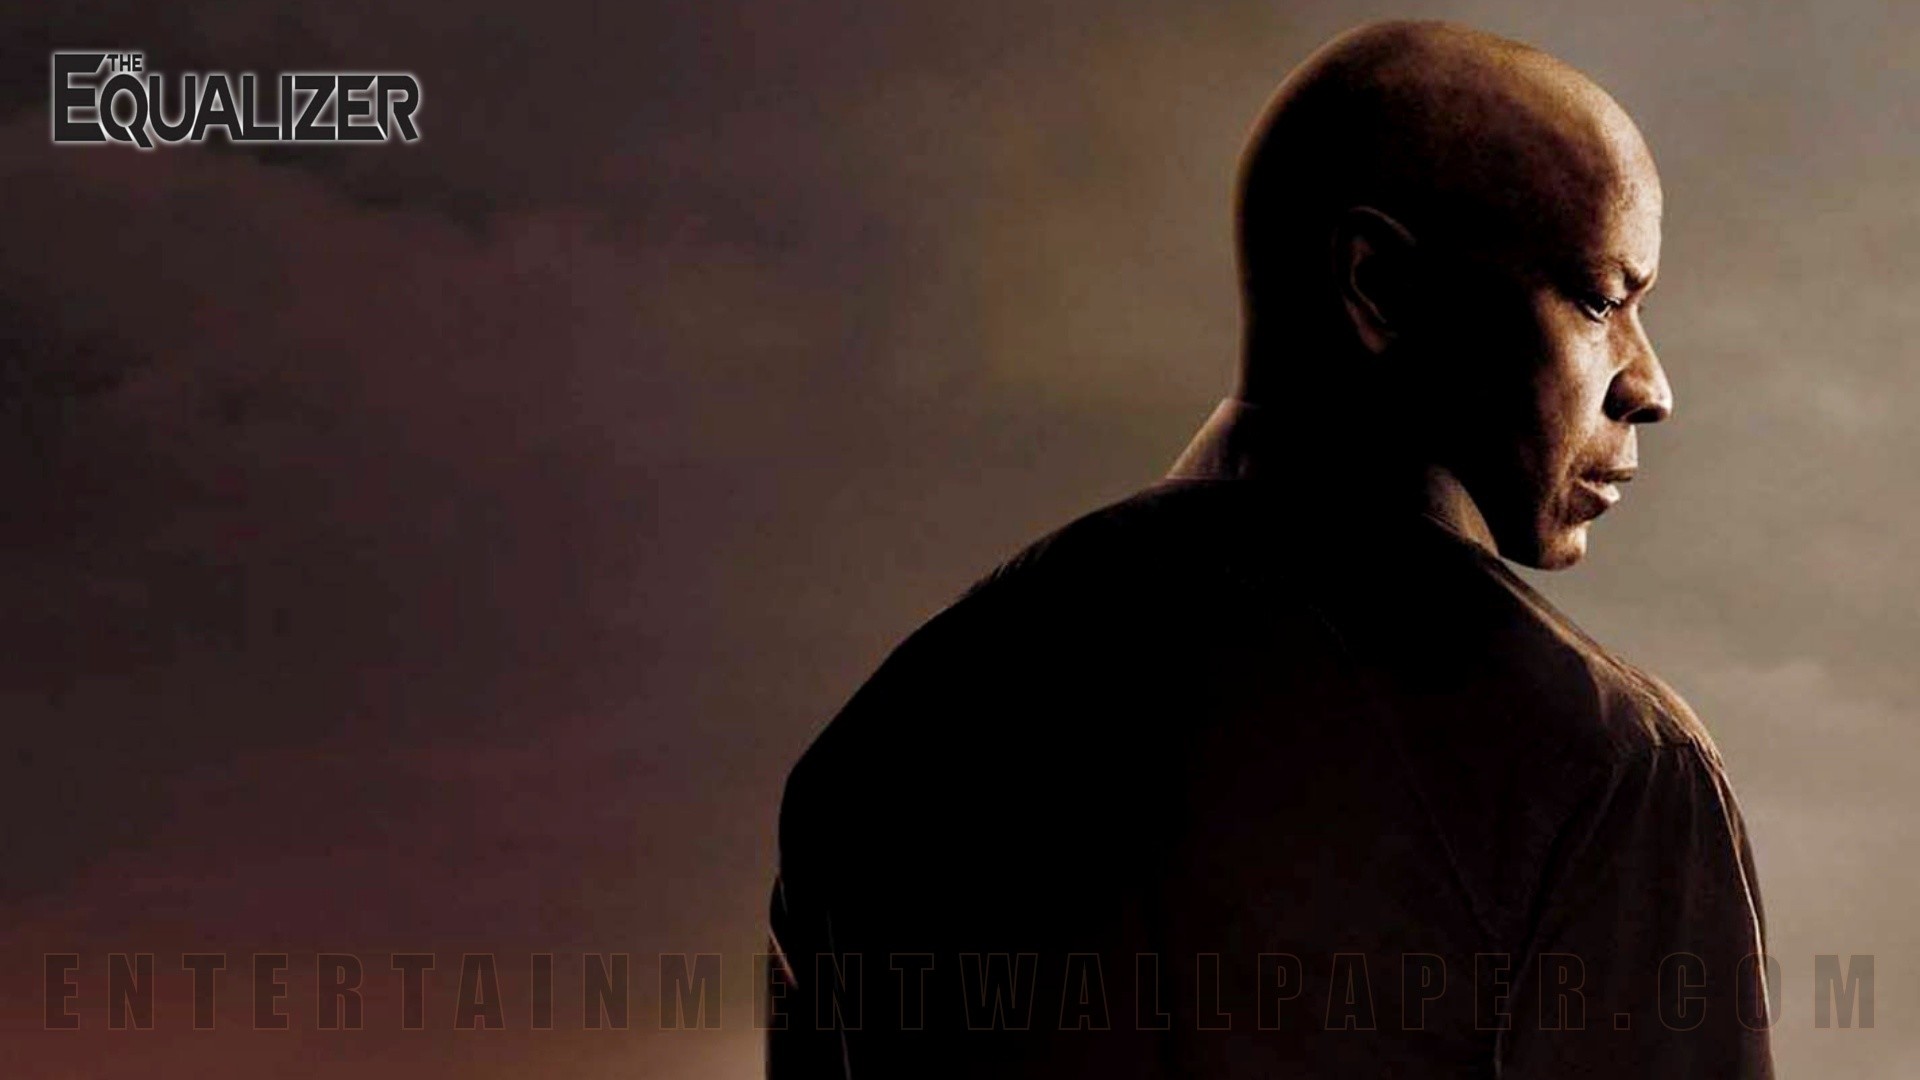 1920x1080 The Equalizer Wallpaper - Original size, download now.